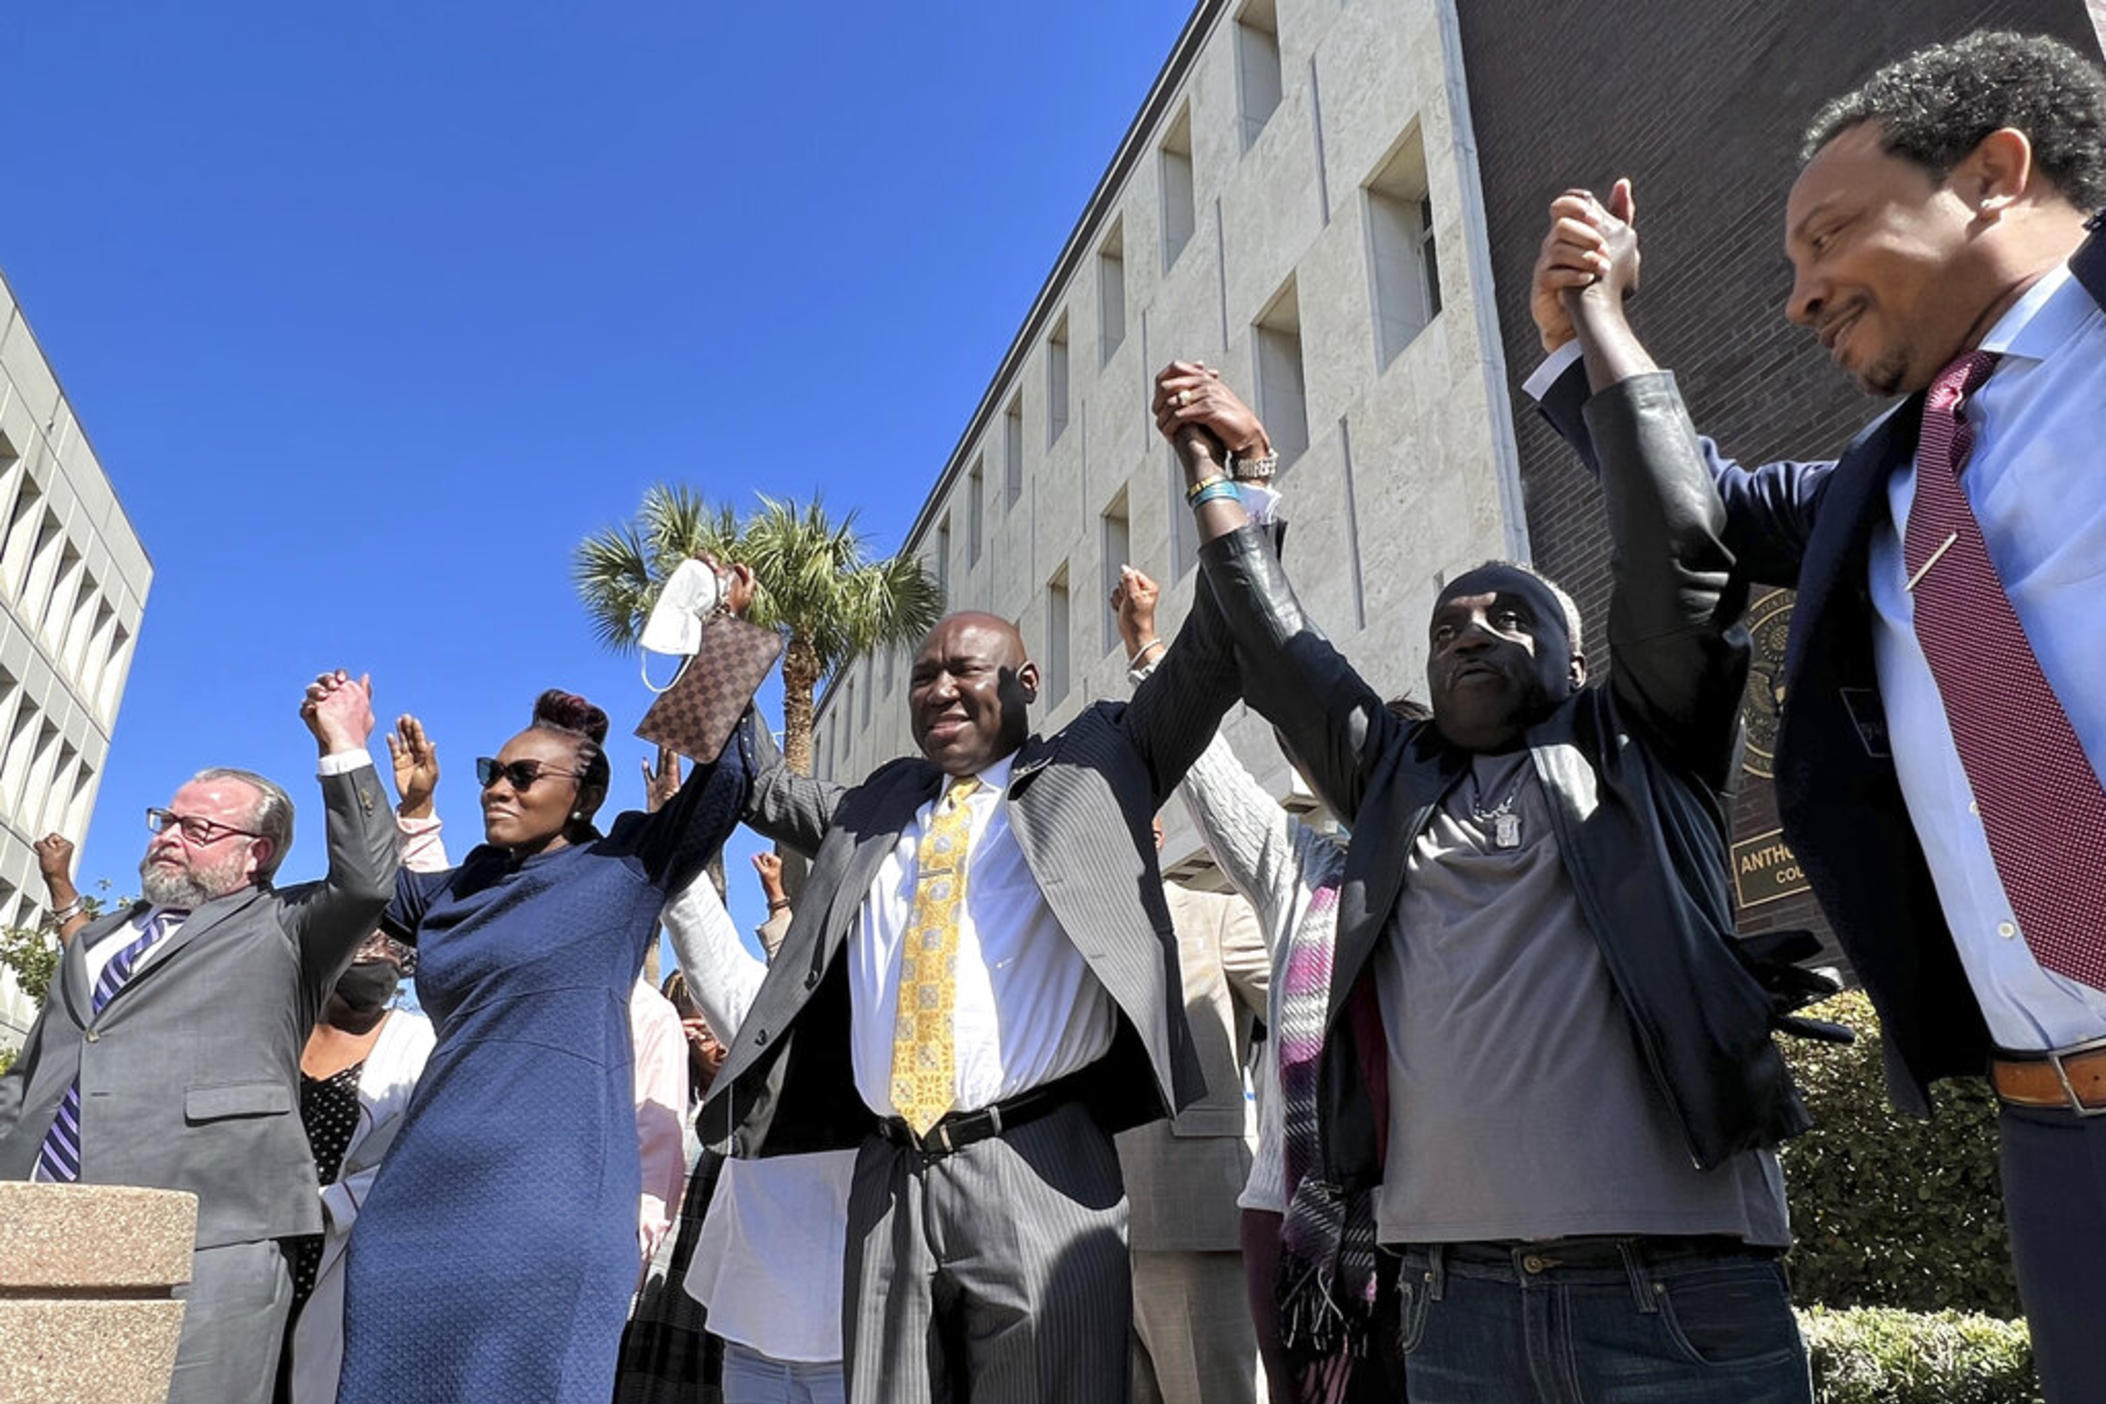 The family of Ahmaud Arbery and attorneys representing his case raise their arms in victory after all three men were found guilty of hates crimes at the federal courthouse in Brunswick, Ga., on Tuesday, Feb. 22, 2022. Greg McMichael, Travis McMichael and William “Roddie” Bryan, the three men convicted of murder in Arbery’s fatal shooting have been found guilty of federal hate crimes.